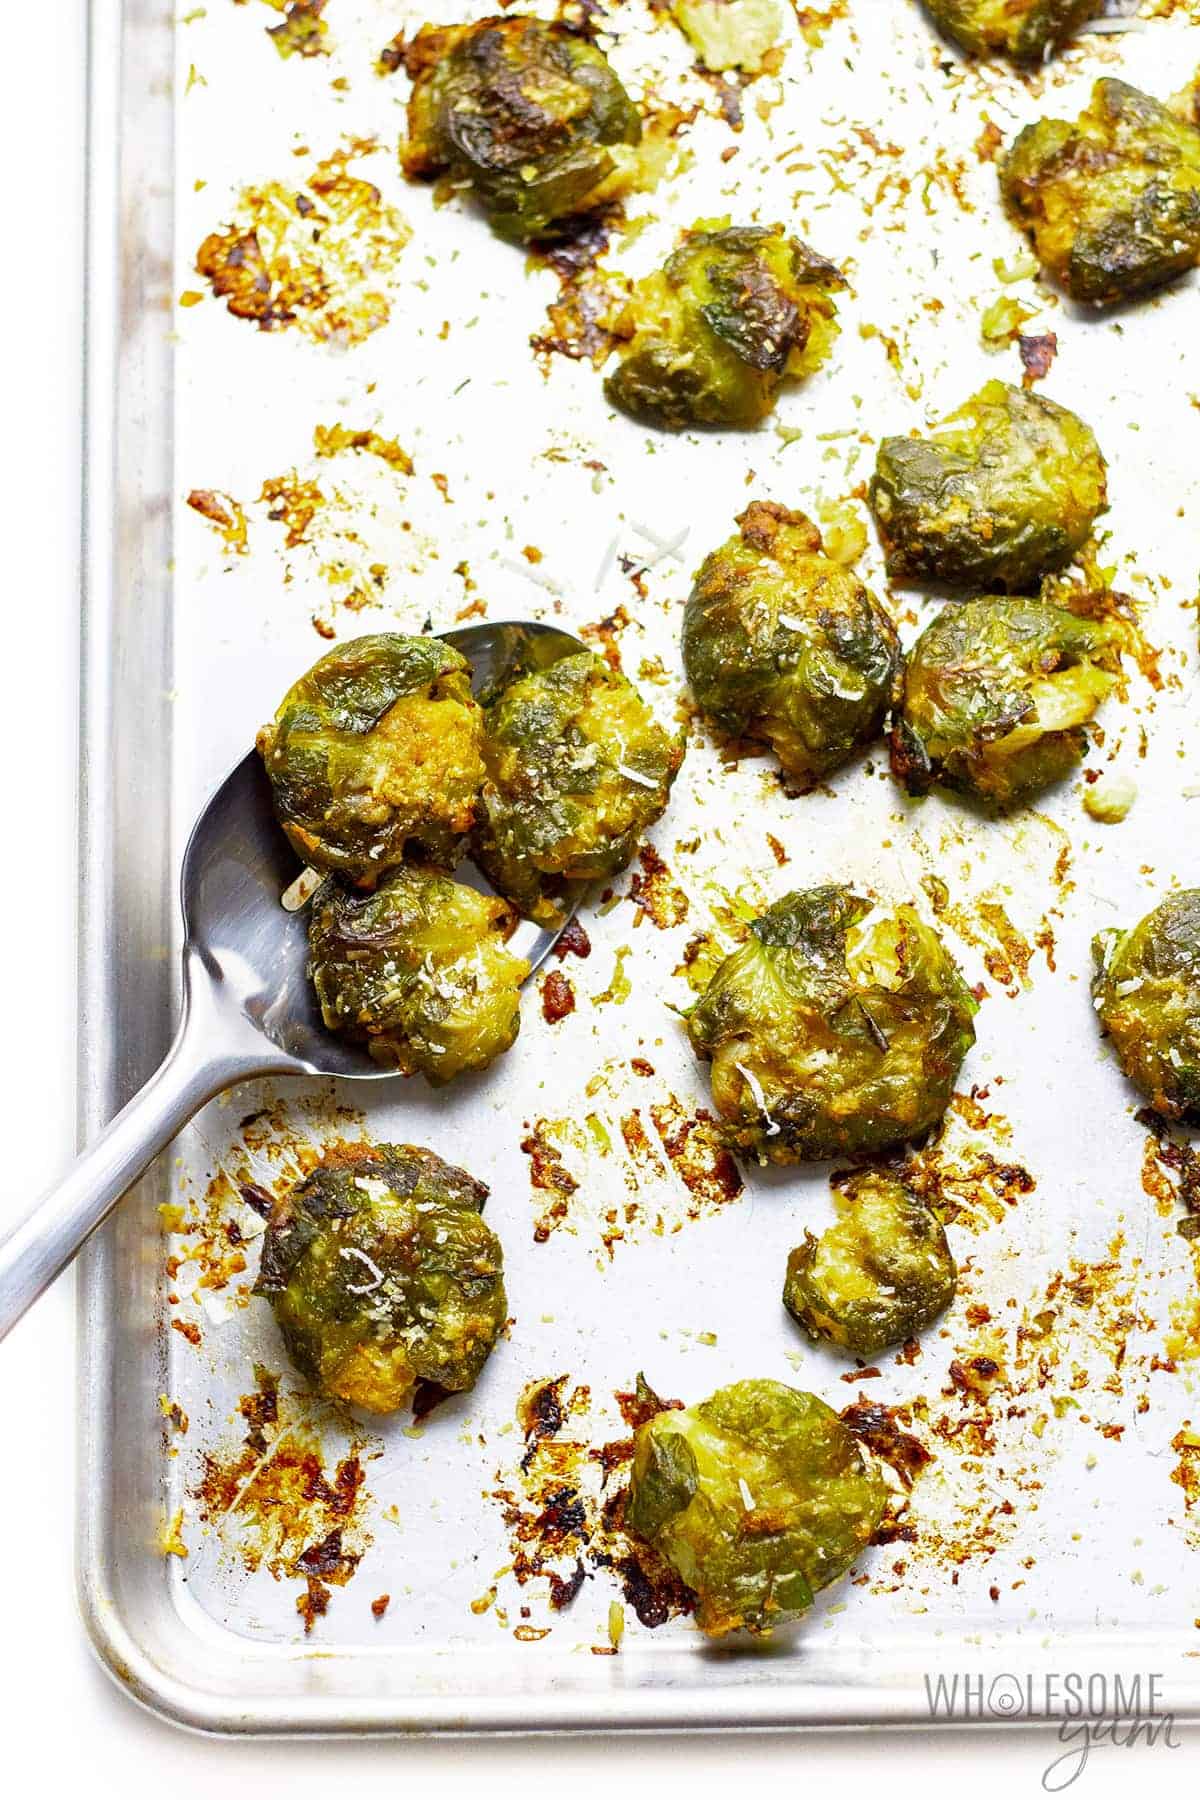 Crispy smashed brussels sprouts on sheet pan with a serving spoon.